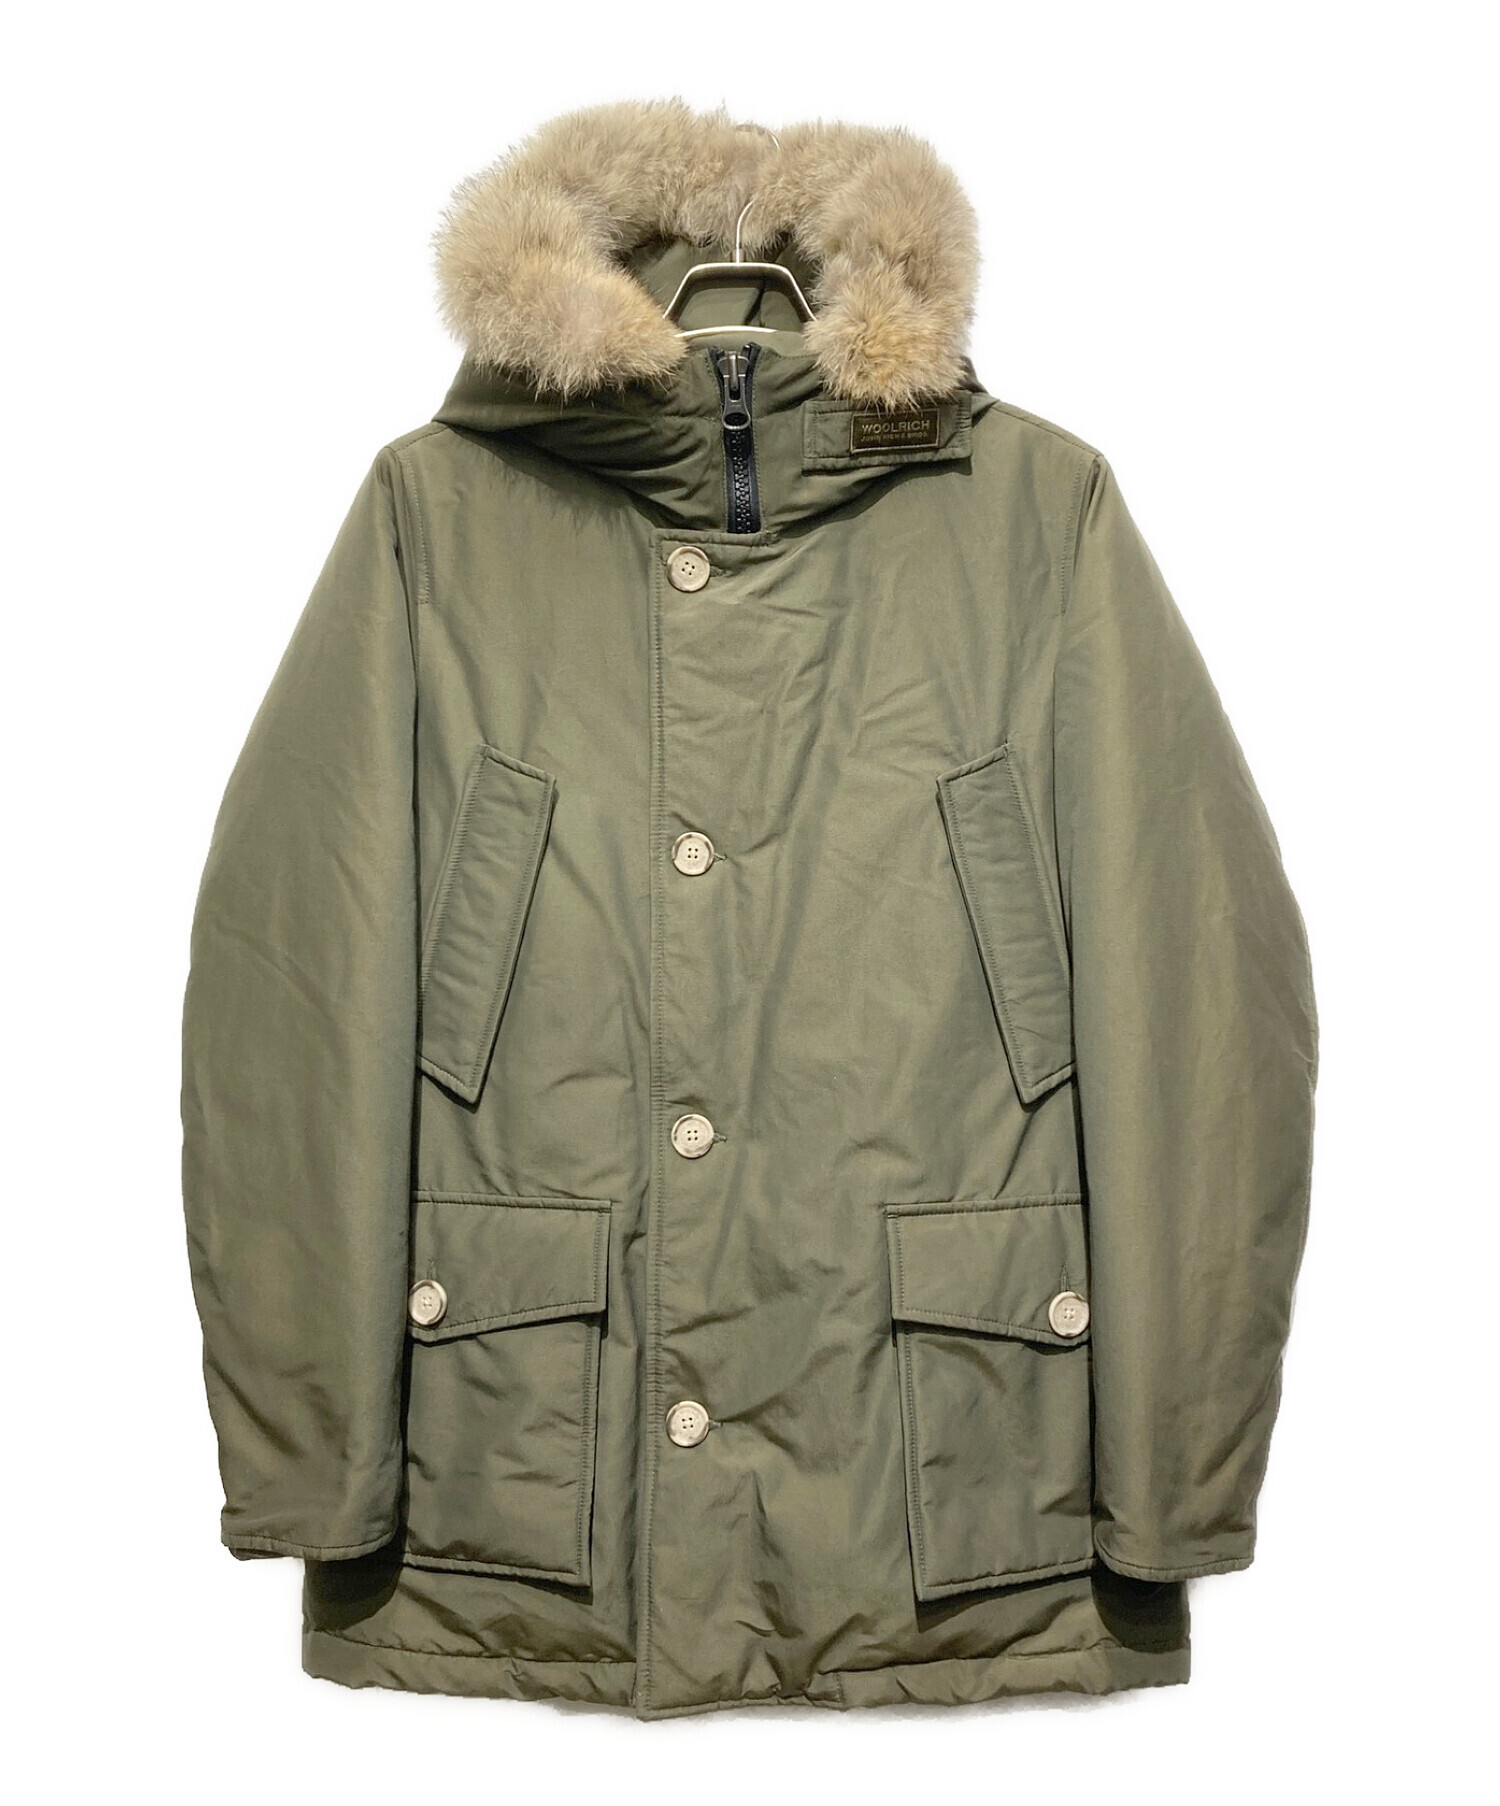 USED 90s woolrich ウールリッチ コート ジップアップ